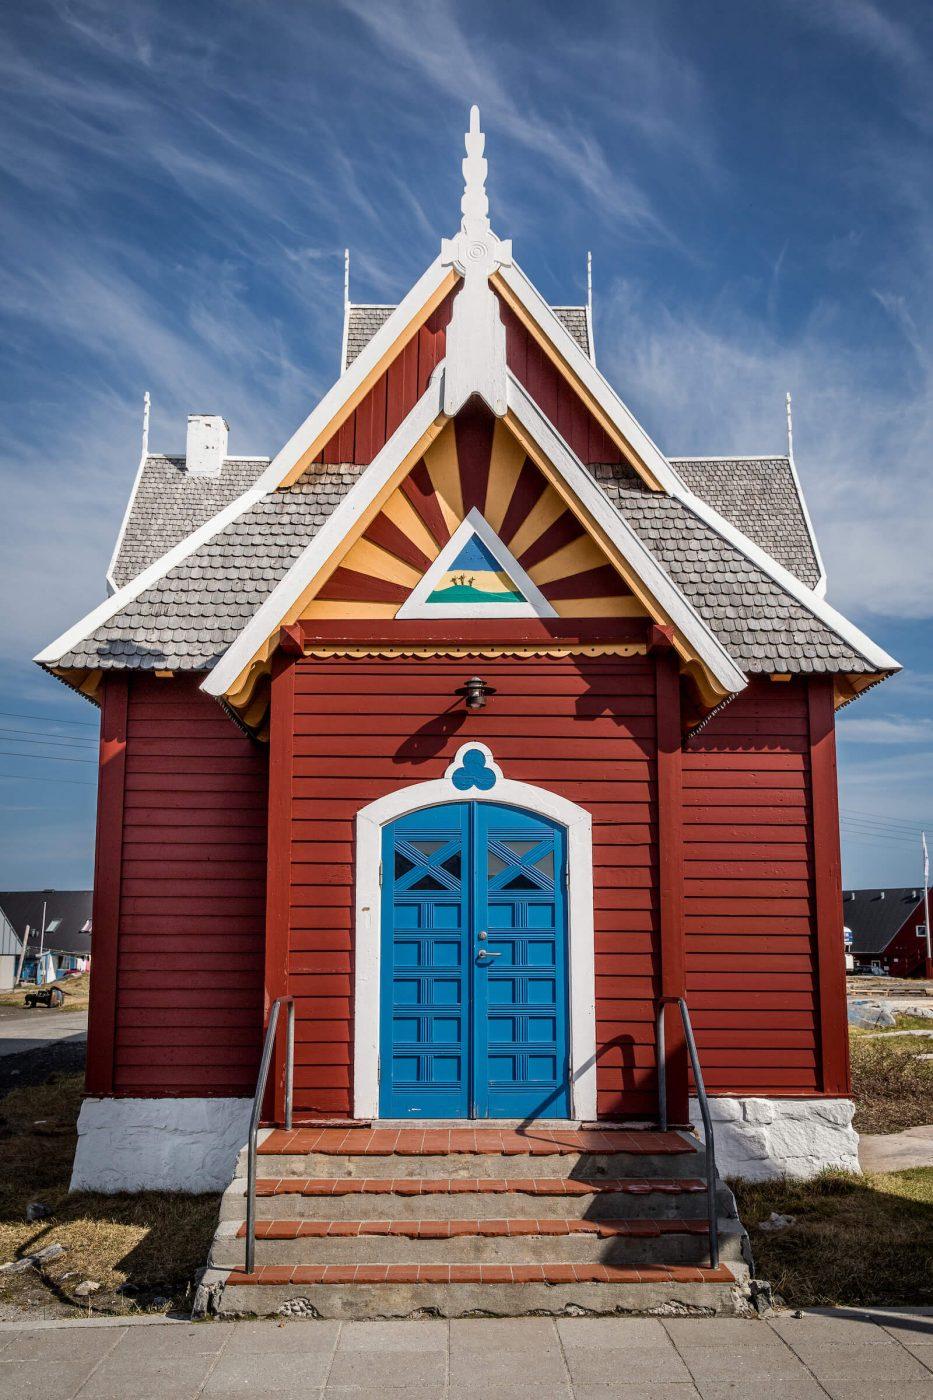 The church entrance in Qeqertarsuaq in Greenland. Photo by Mads Pihl.